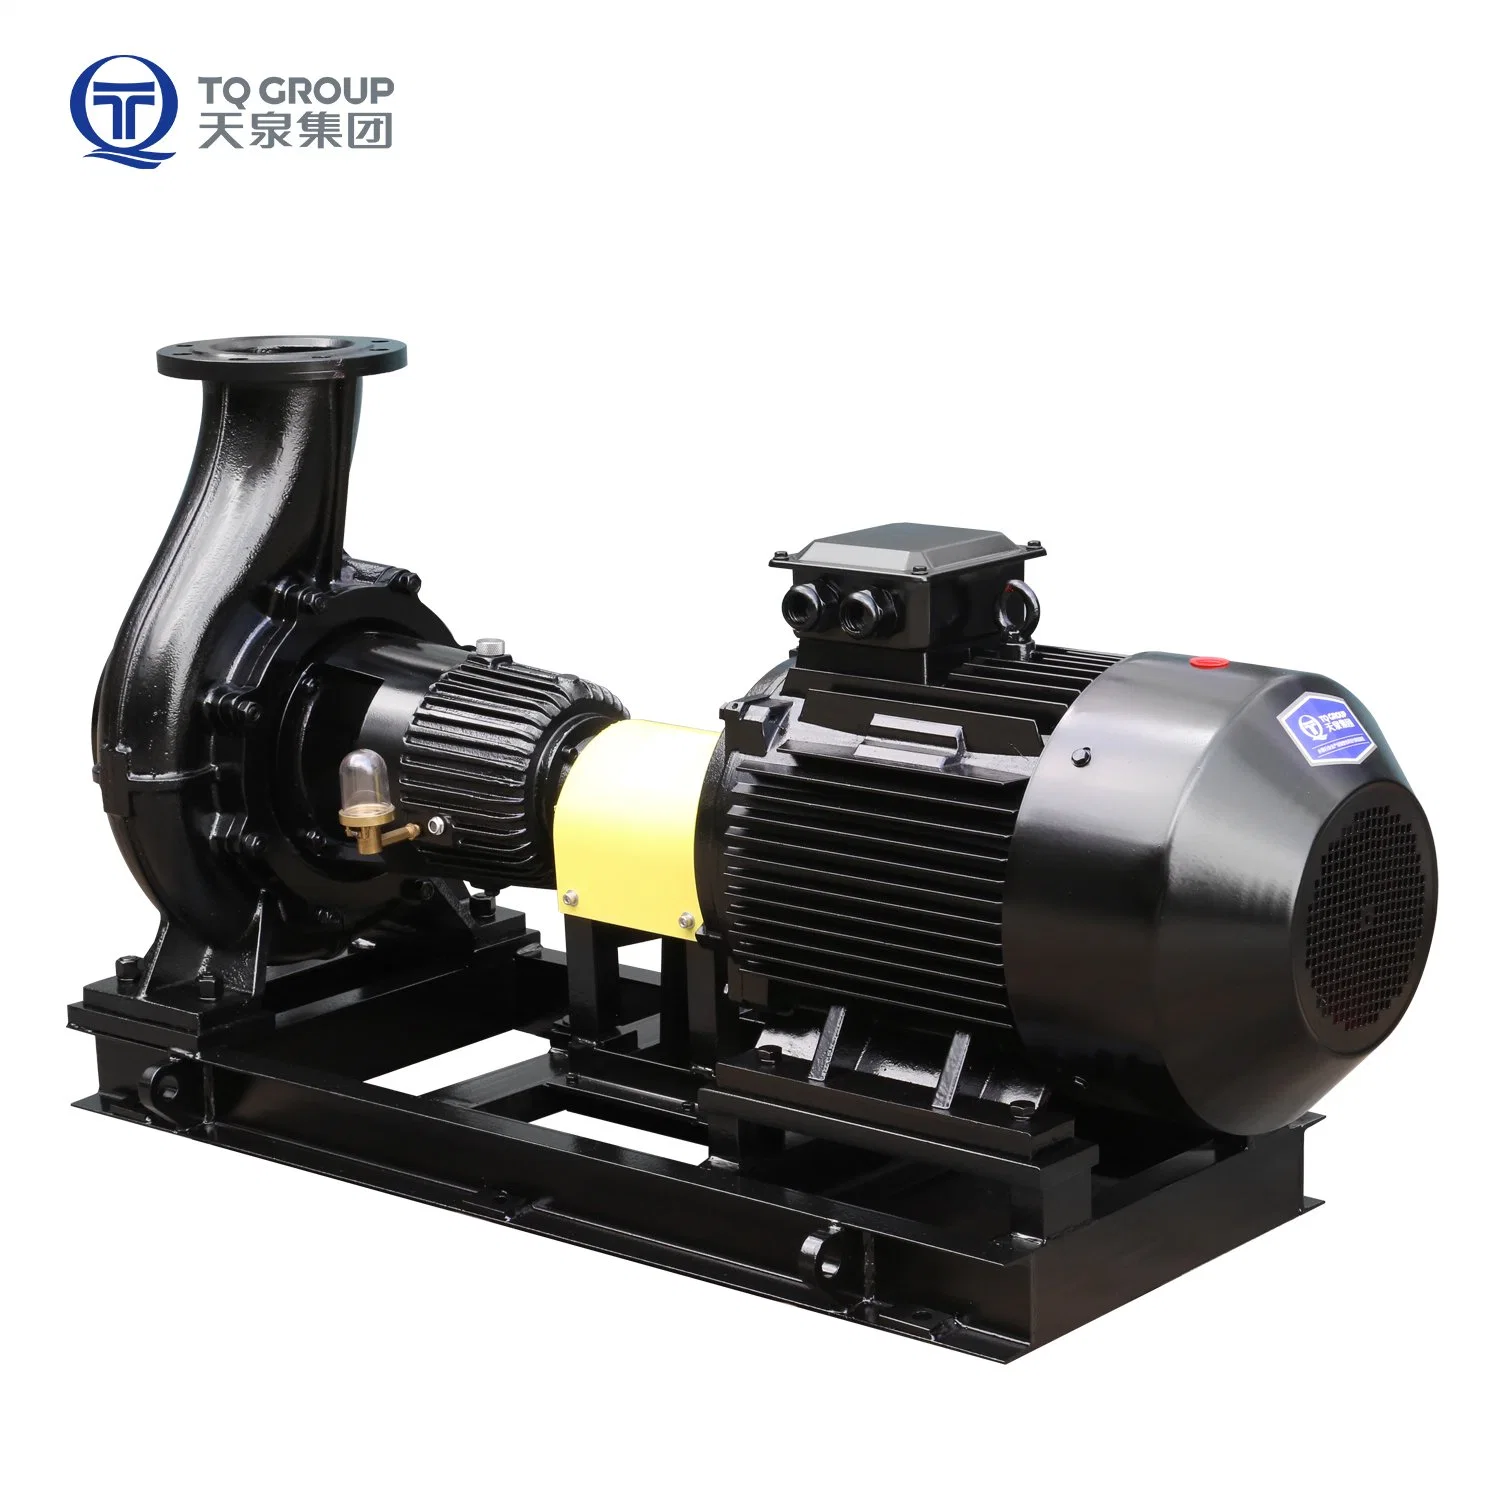 Tq Pump Twx Horizontal End Suction Centrifugal Pump Long-Coupled DN250 Variants for Multiple Purpose Usage -Nkg Substitutes